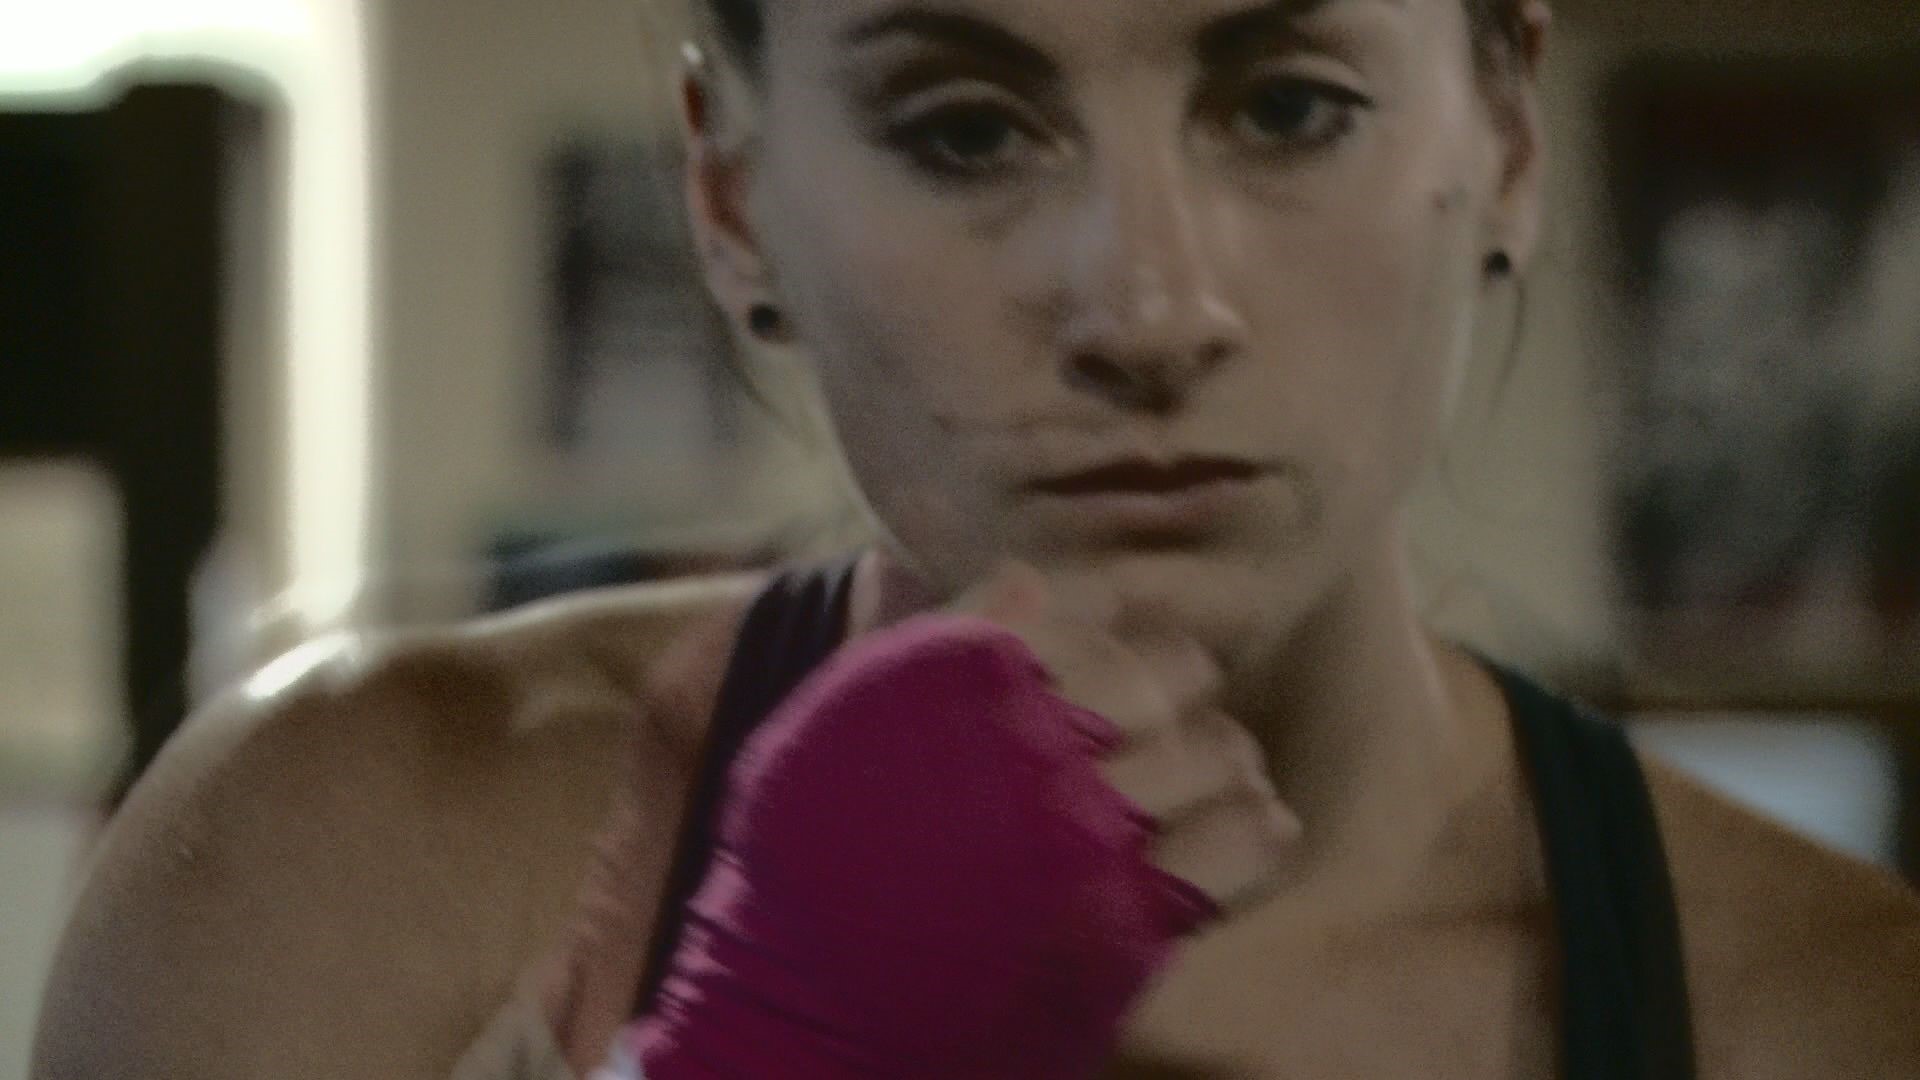 Amelia Moore is one tough cookie. She has won the U. S. Elite National Championship, The PAL National Championship and The National Golden Gloves Championship.